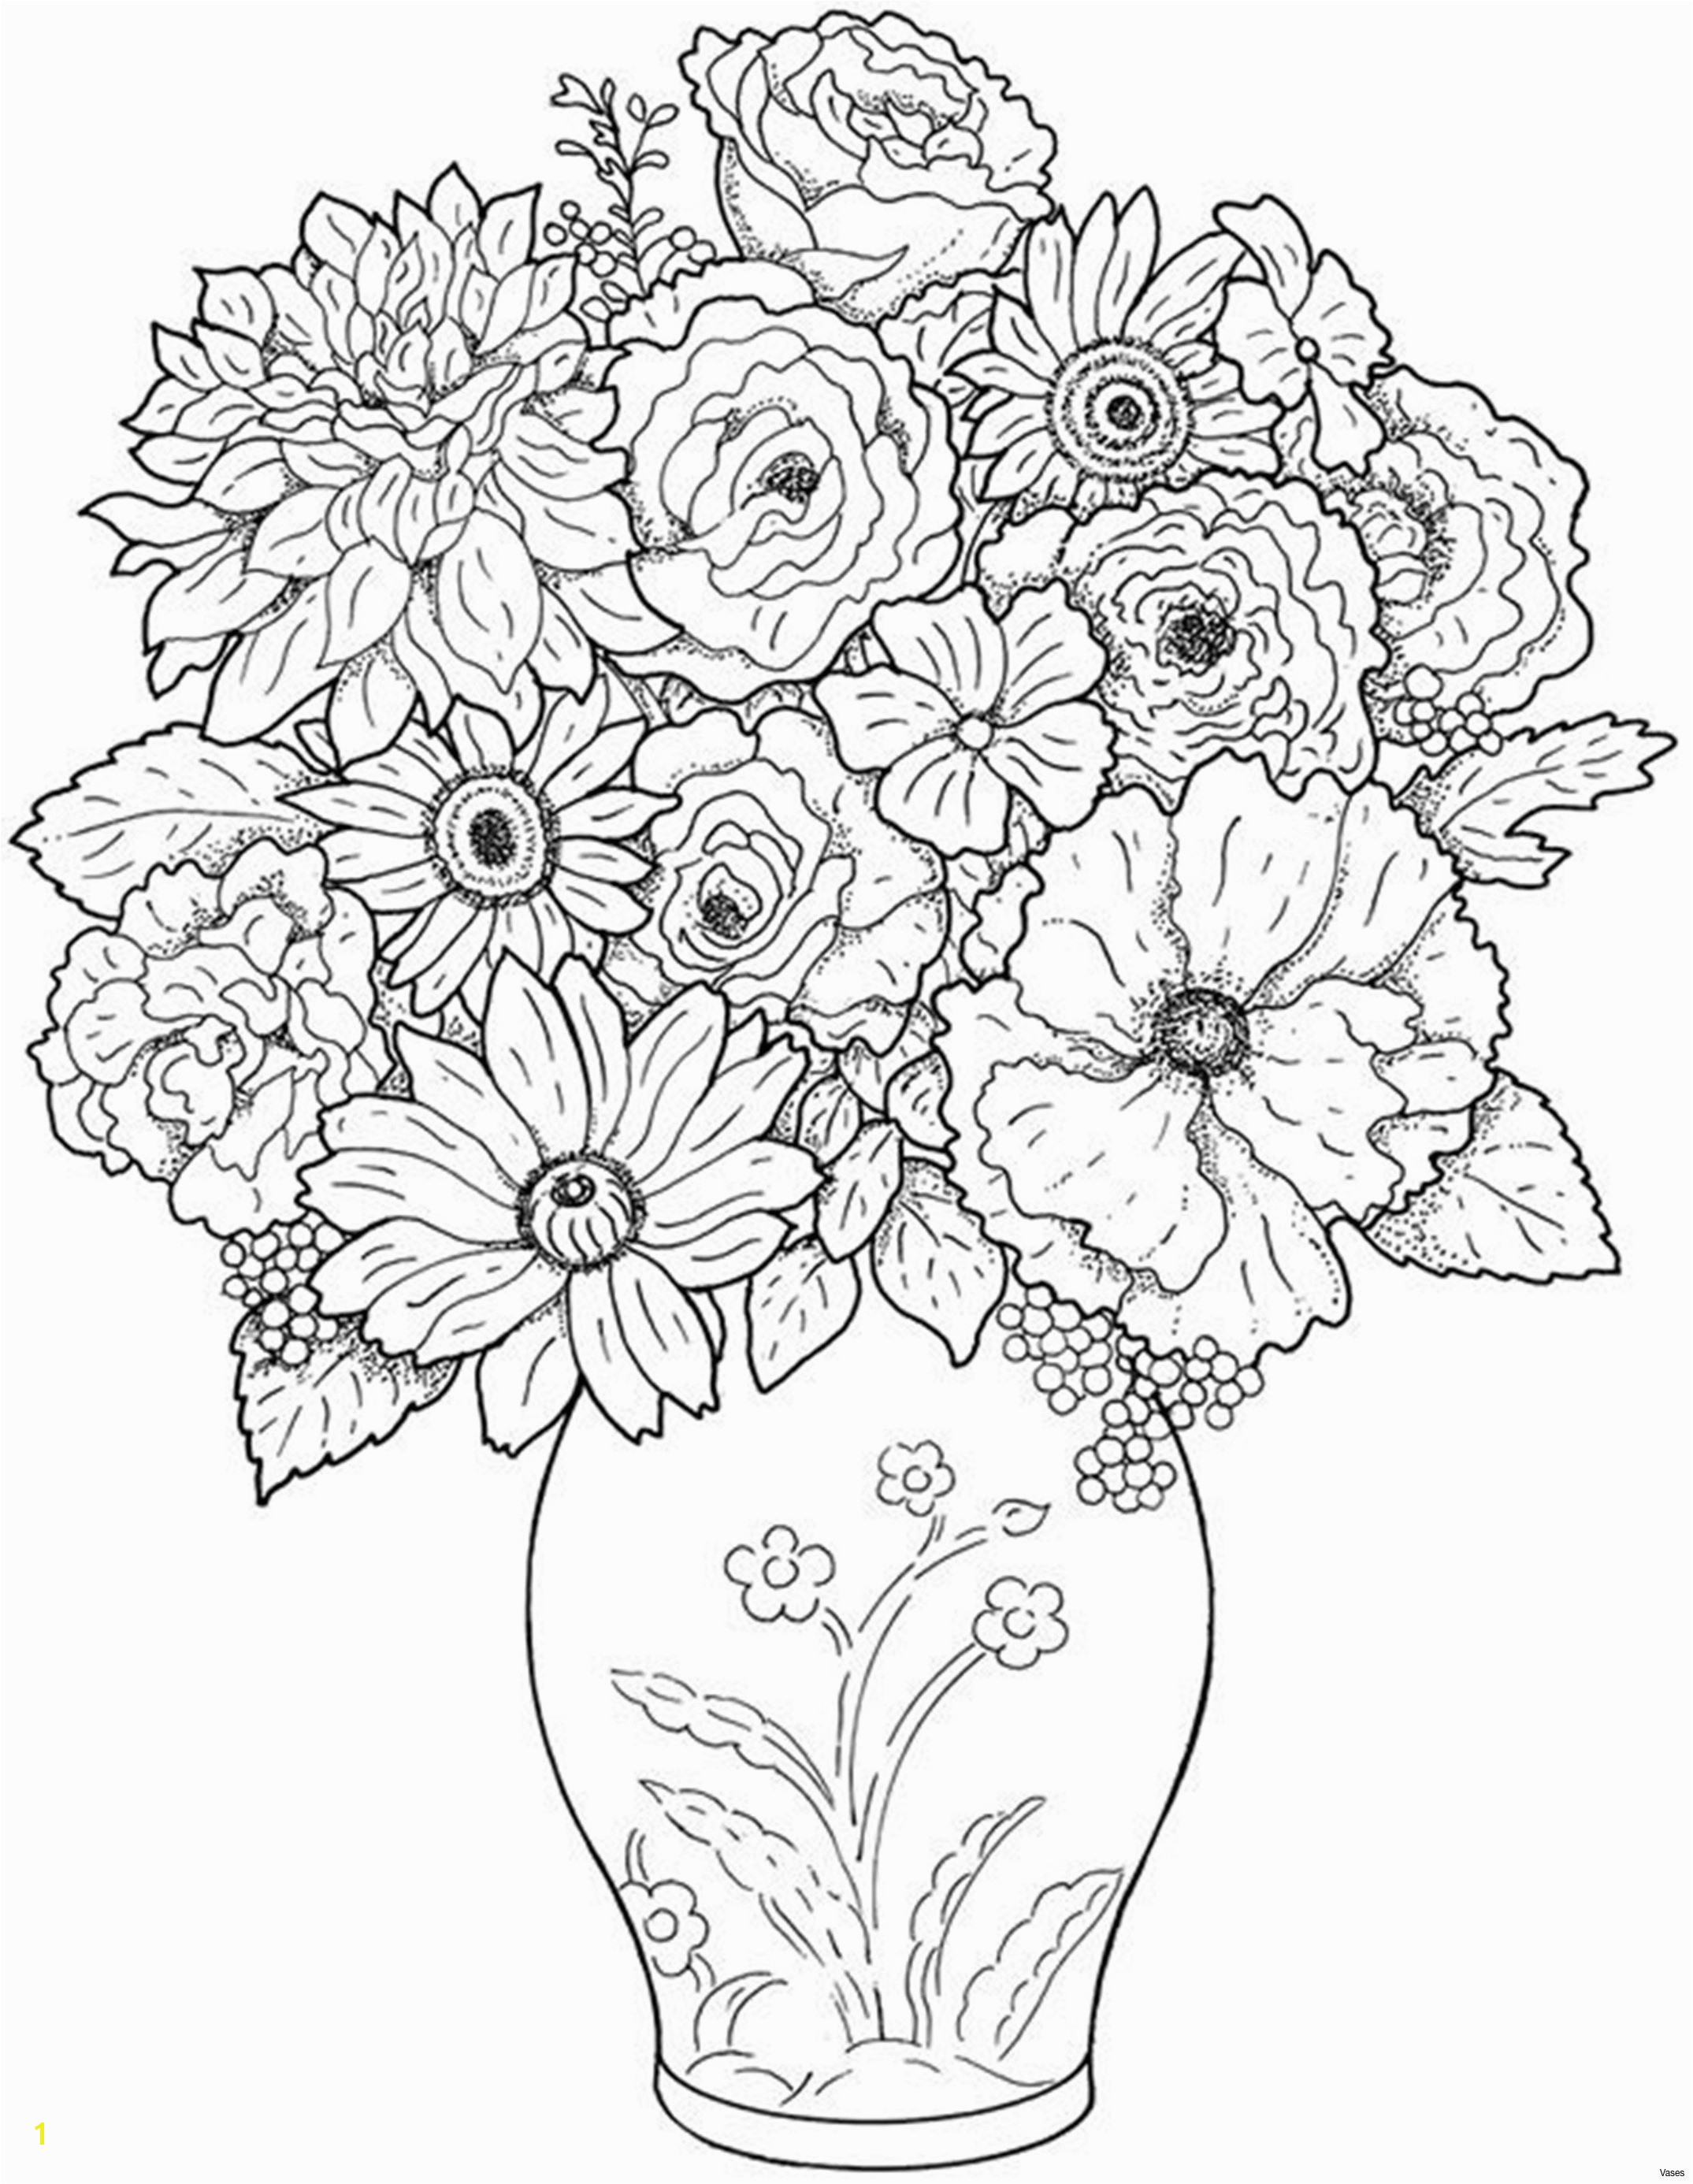 Spring Flowers Coloring Pages Coloring Pages for Adults Flowers Coloring Chrsistmas